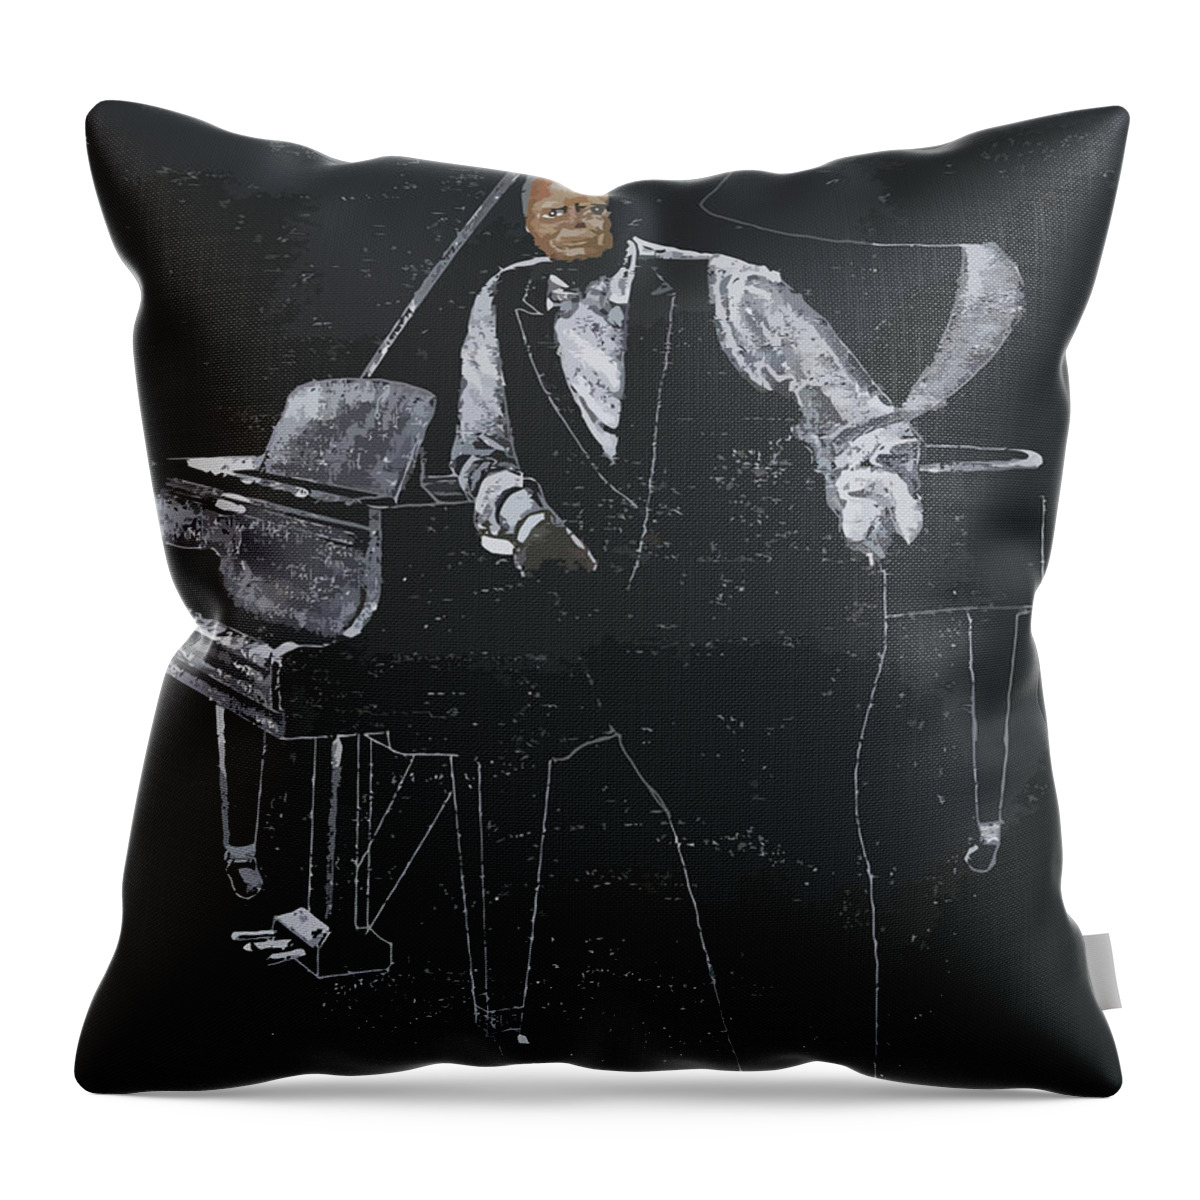 Jazz Throw Pillow featuring the painting Oscar Peterson by Richard Le Page